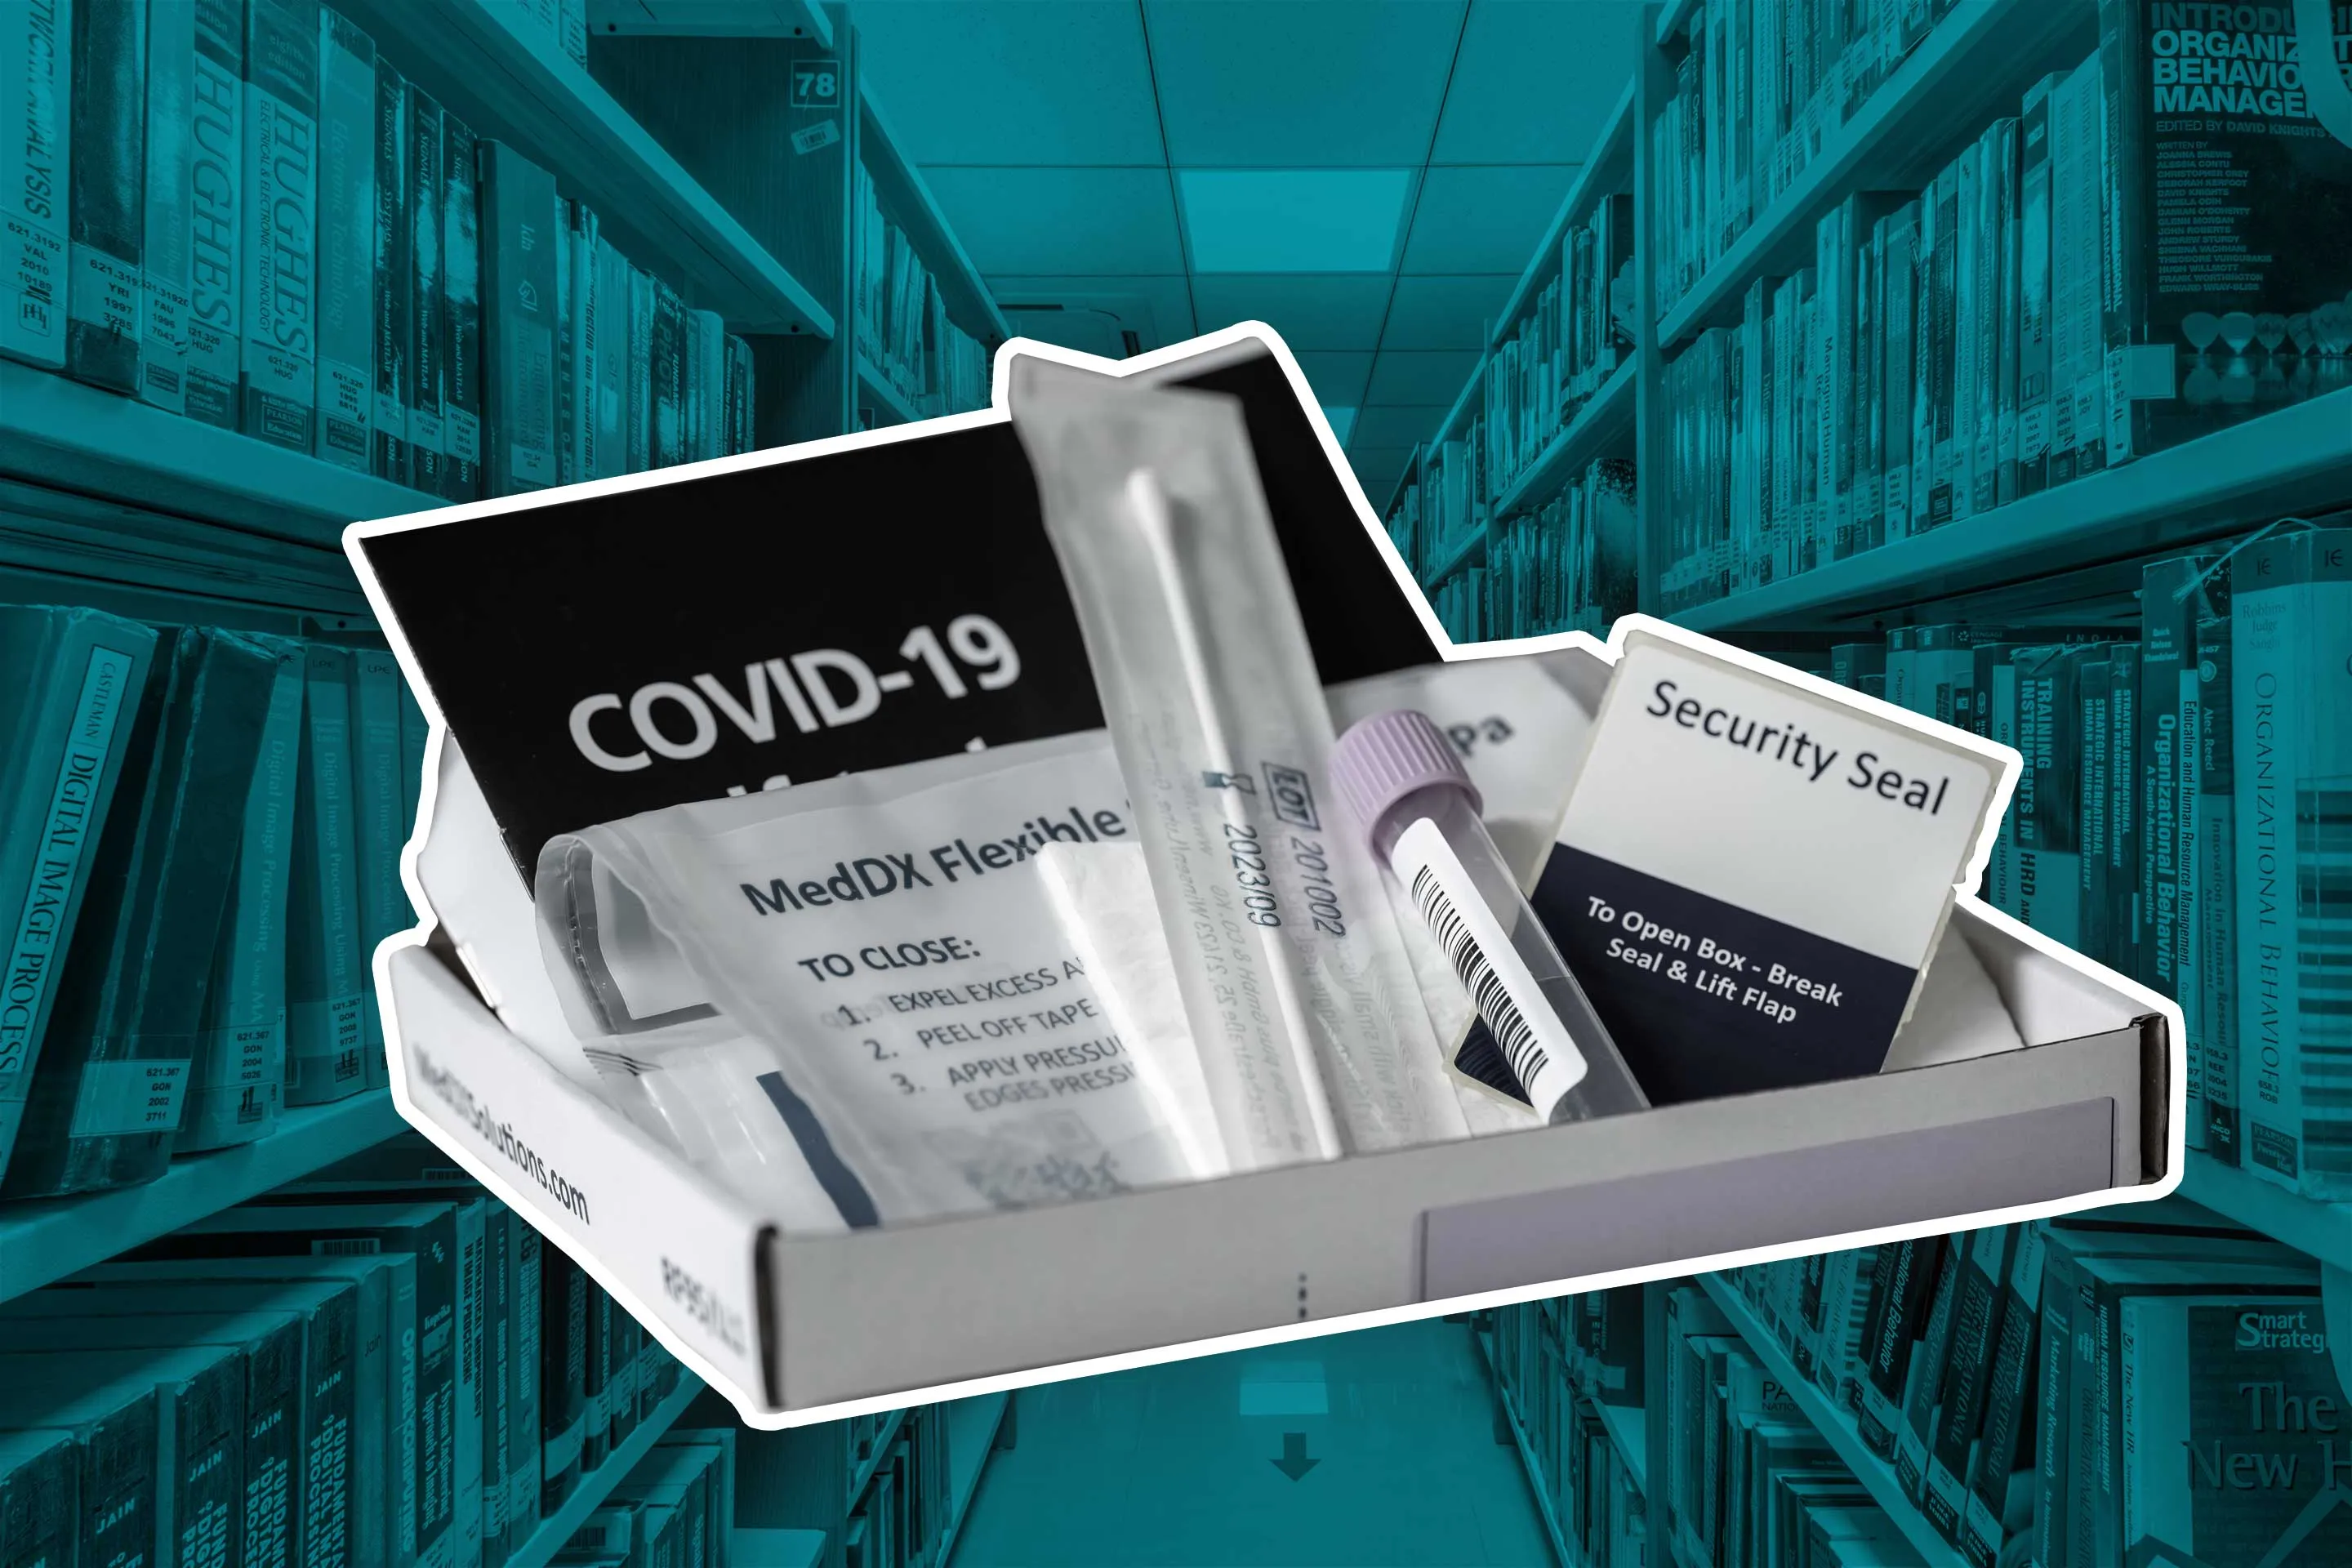 Your Local Library Might Have Free At-Home COVID-19 Tests